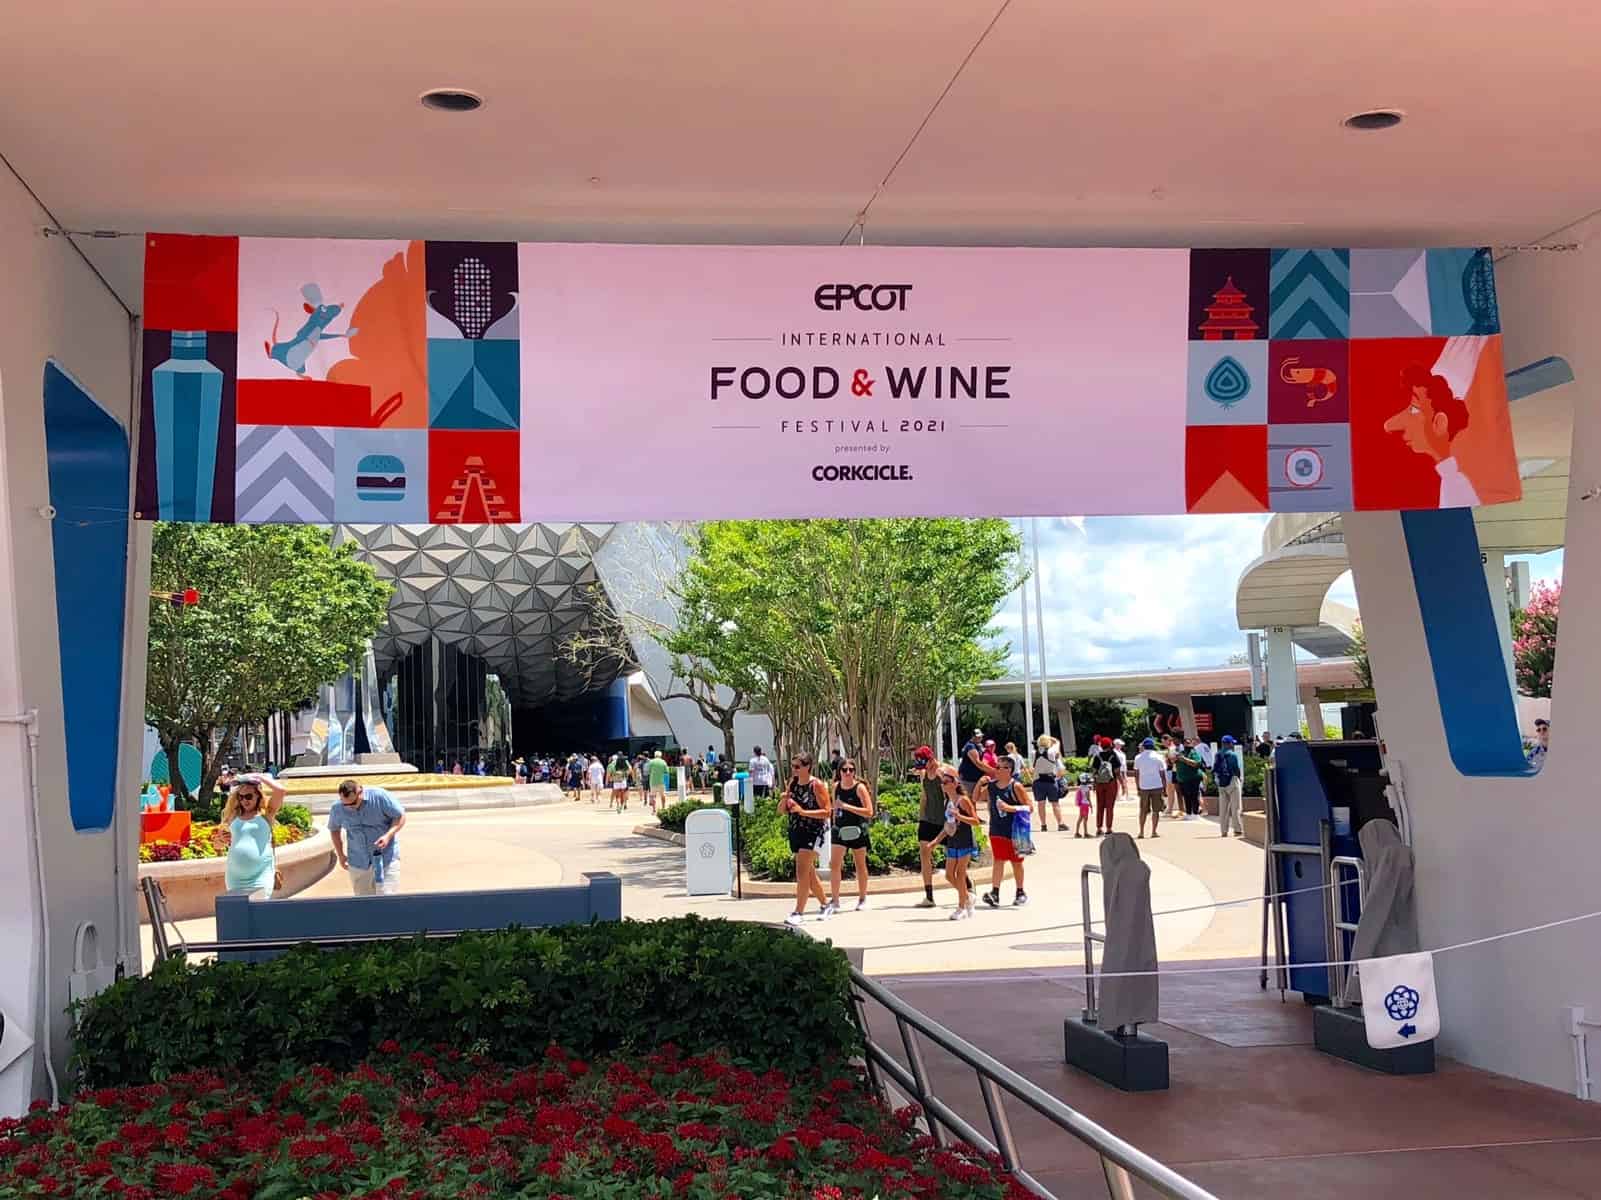 9 Epcot Food and Wine Tips to Help You Navigate the 2021 Festival